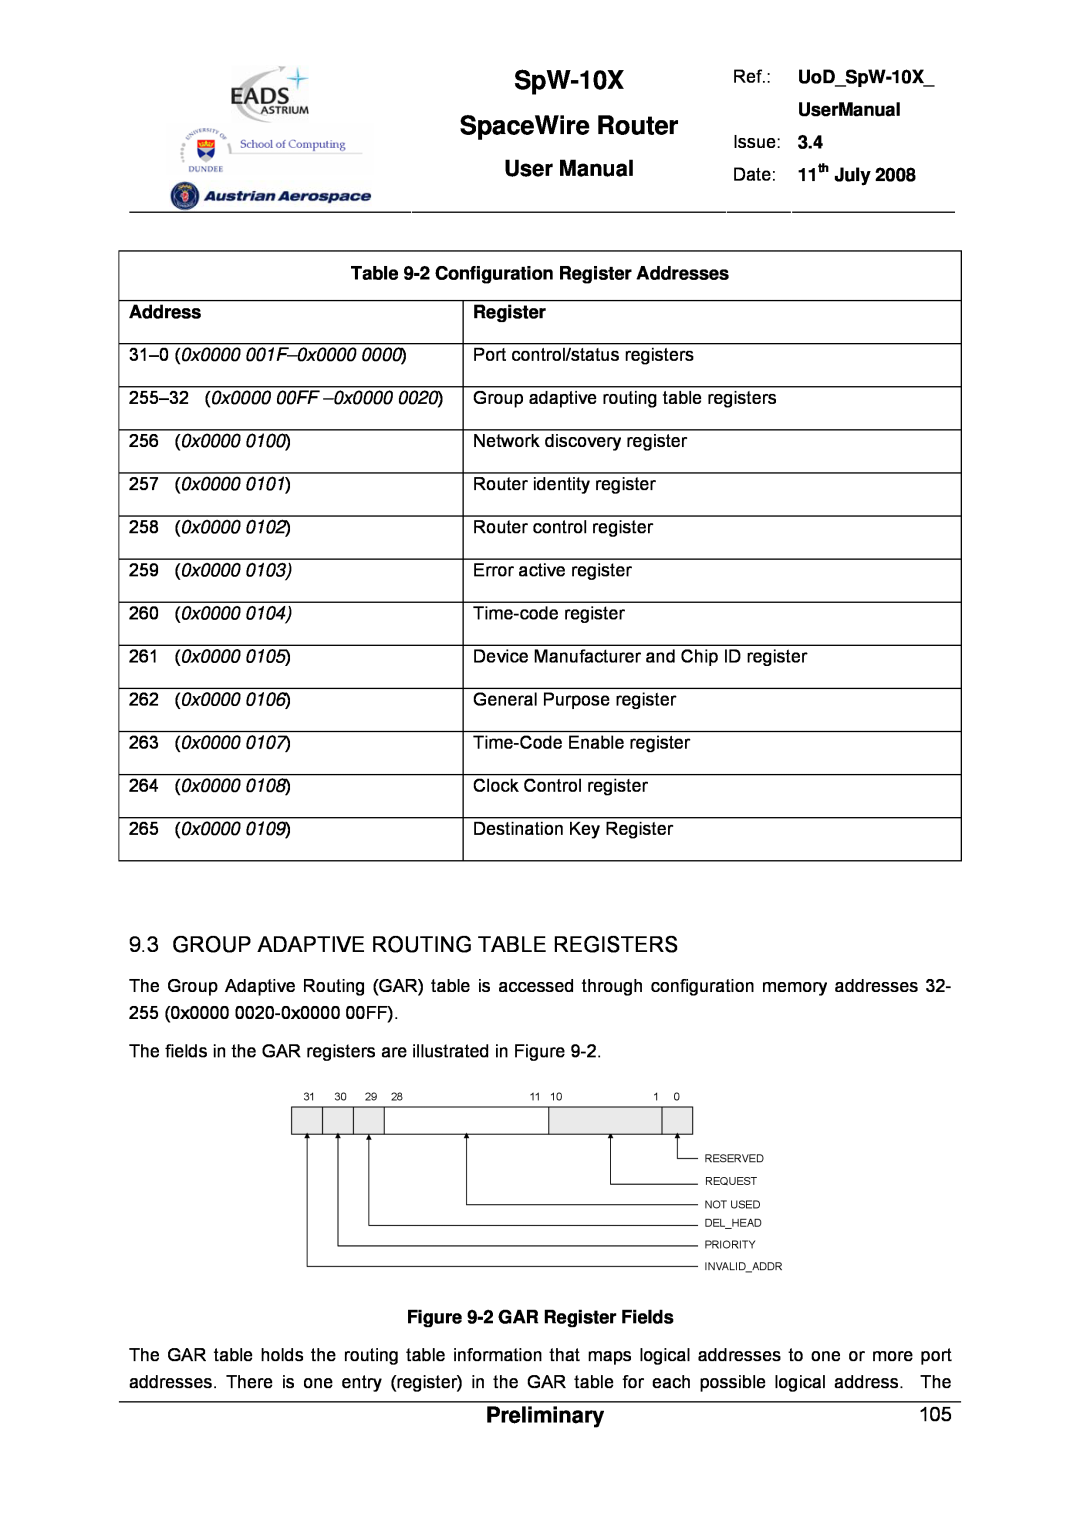 Atmel SpW-10X user manual Group Adaptive Routing Table Registers, SpaceWire Router, User Manual, Preliminary 